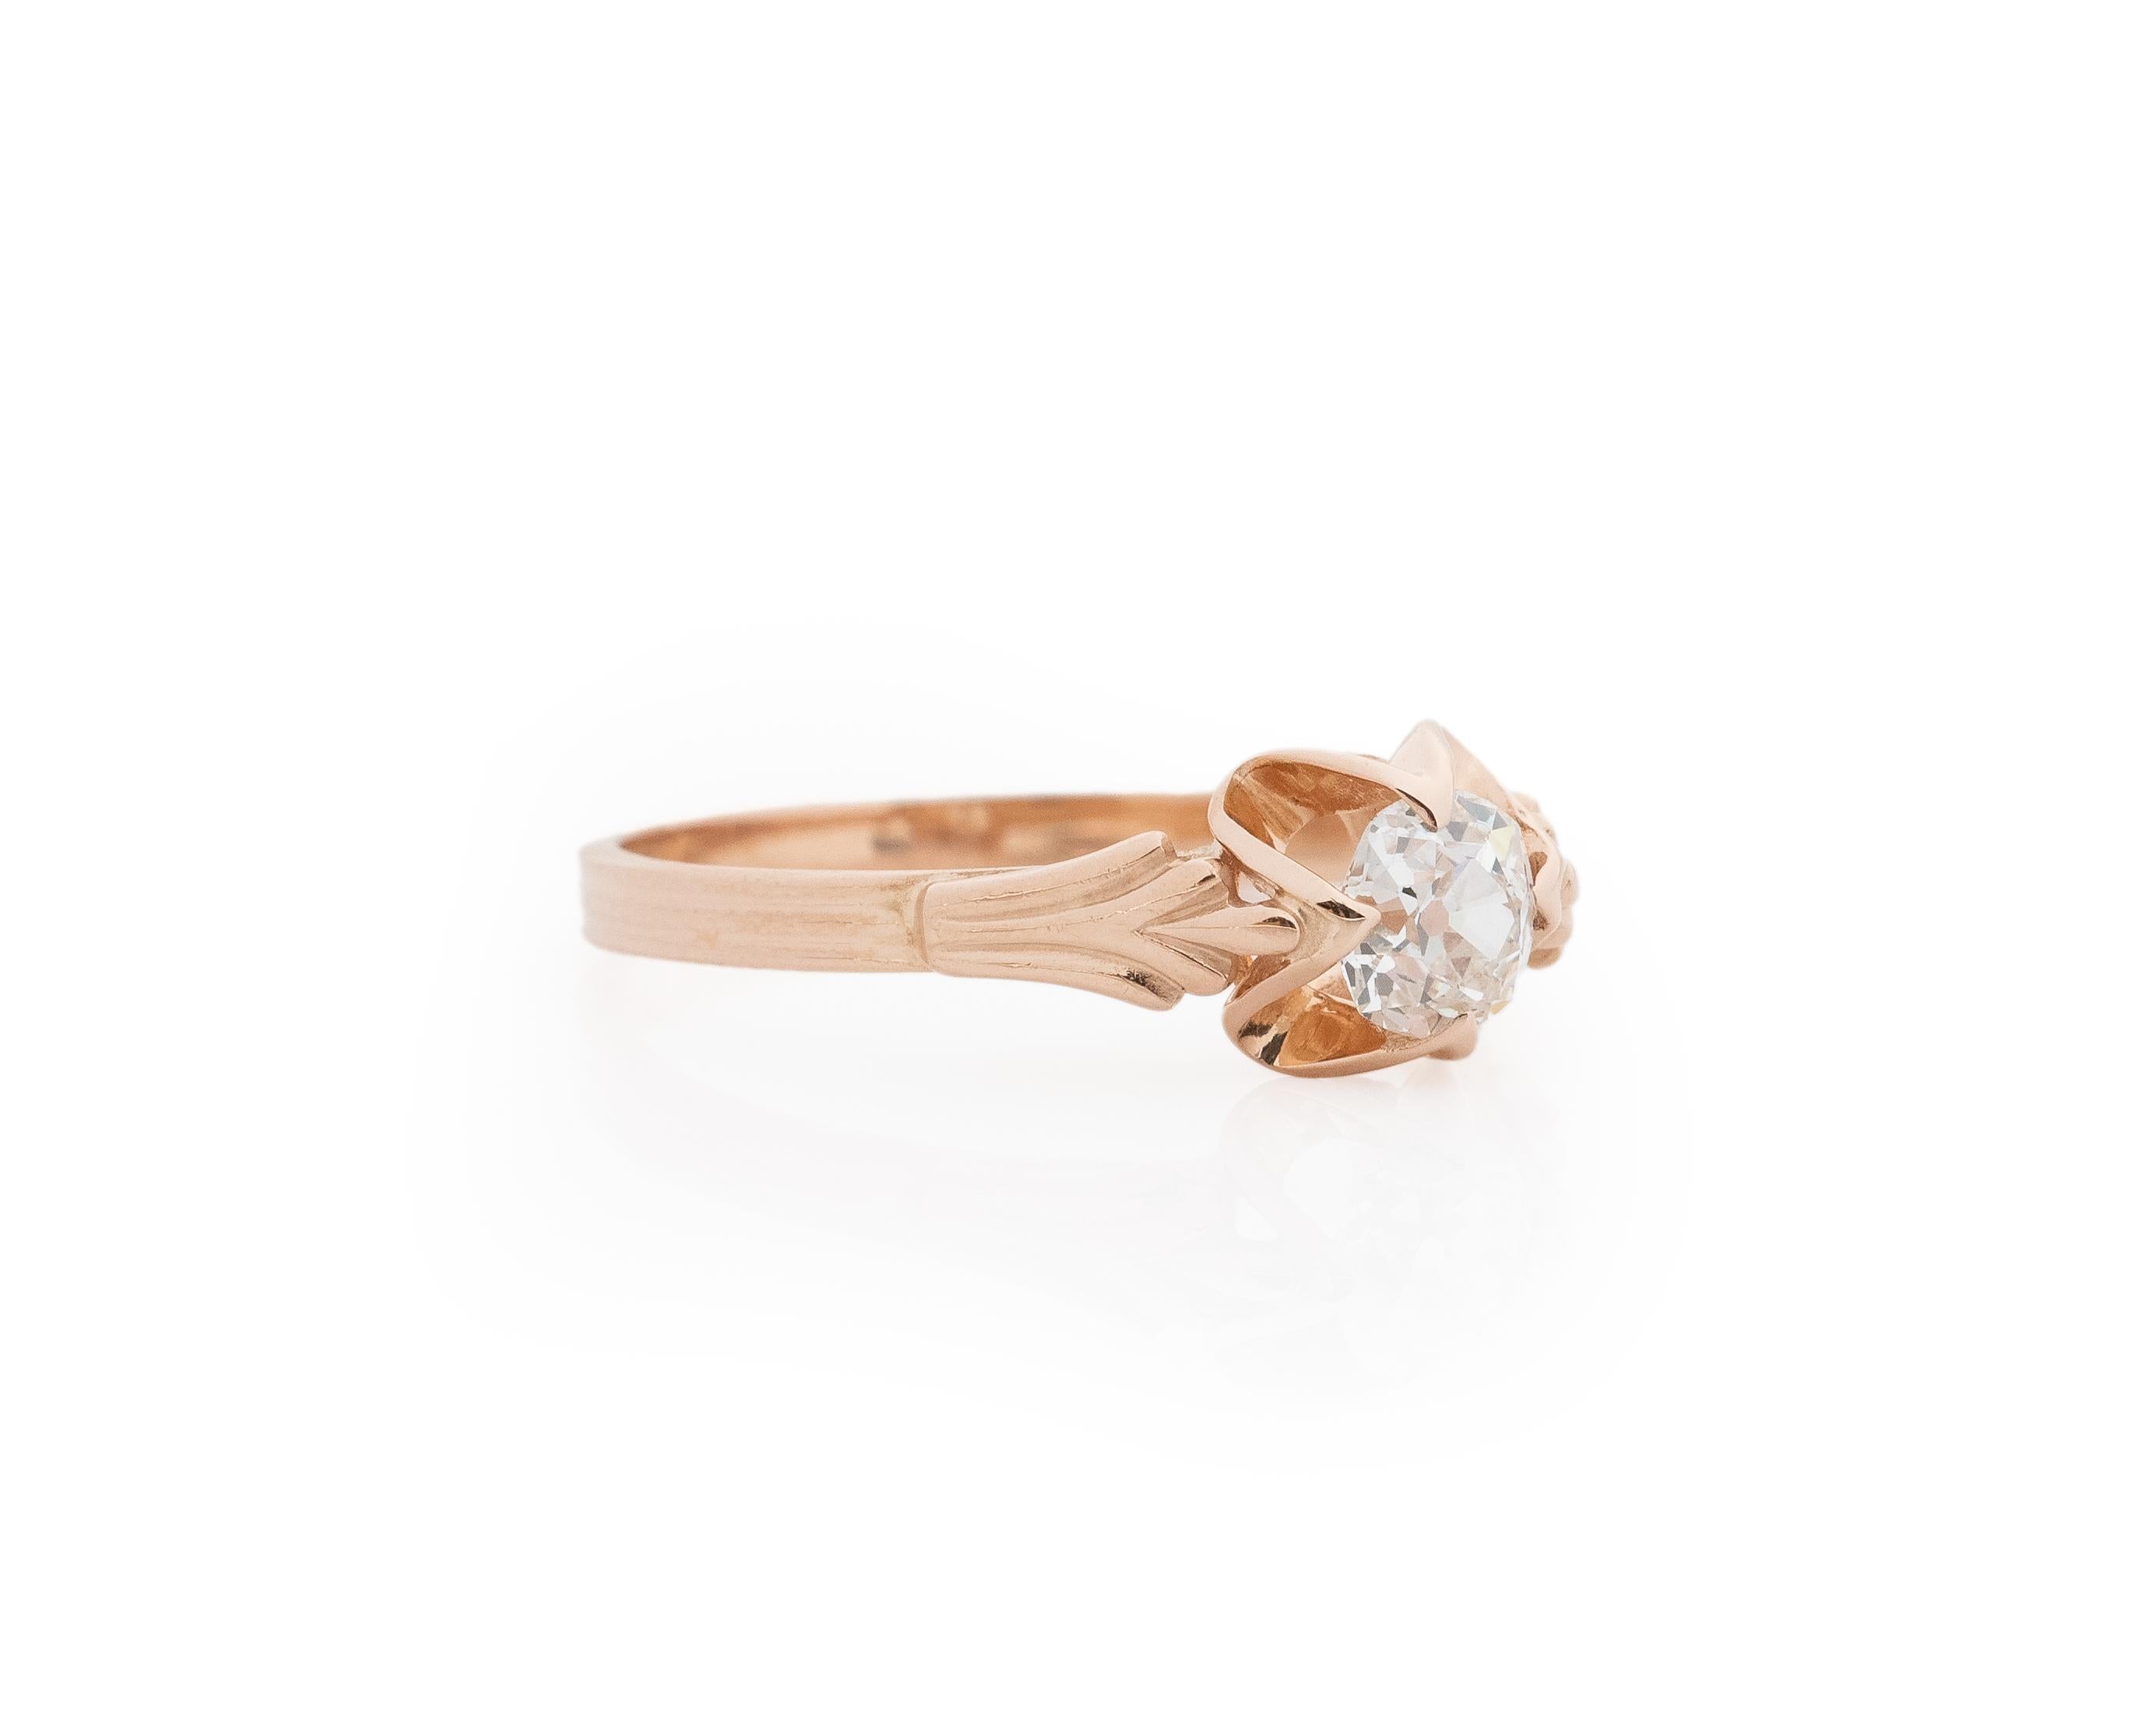 Year: 1920s

Item Details:
Ring Size: 7
Metal Type: 14K Rose Gold [Hallmarked, and Tested]
Weight: 2.4 grams

Diamond Details:

GIA Report#:5234138316
Weight: .55ct total weight
Cut: Old European brilliant
Color: I
Clarity: VS1
Type: Natural

Finger